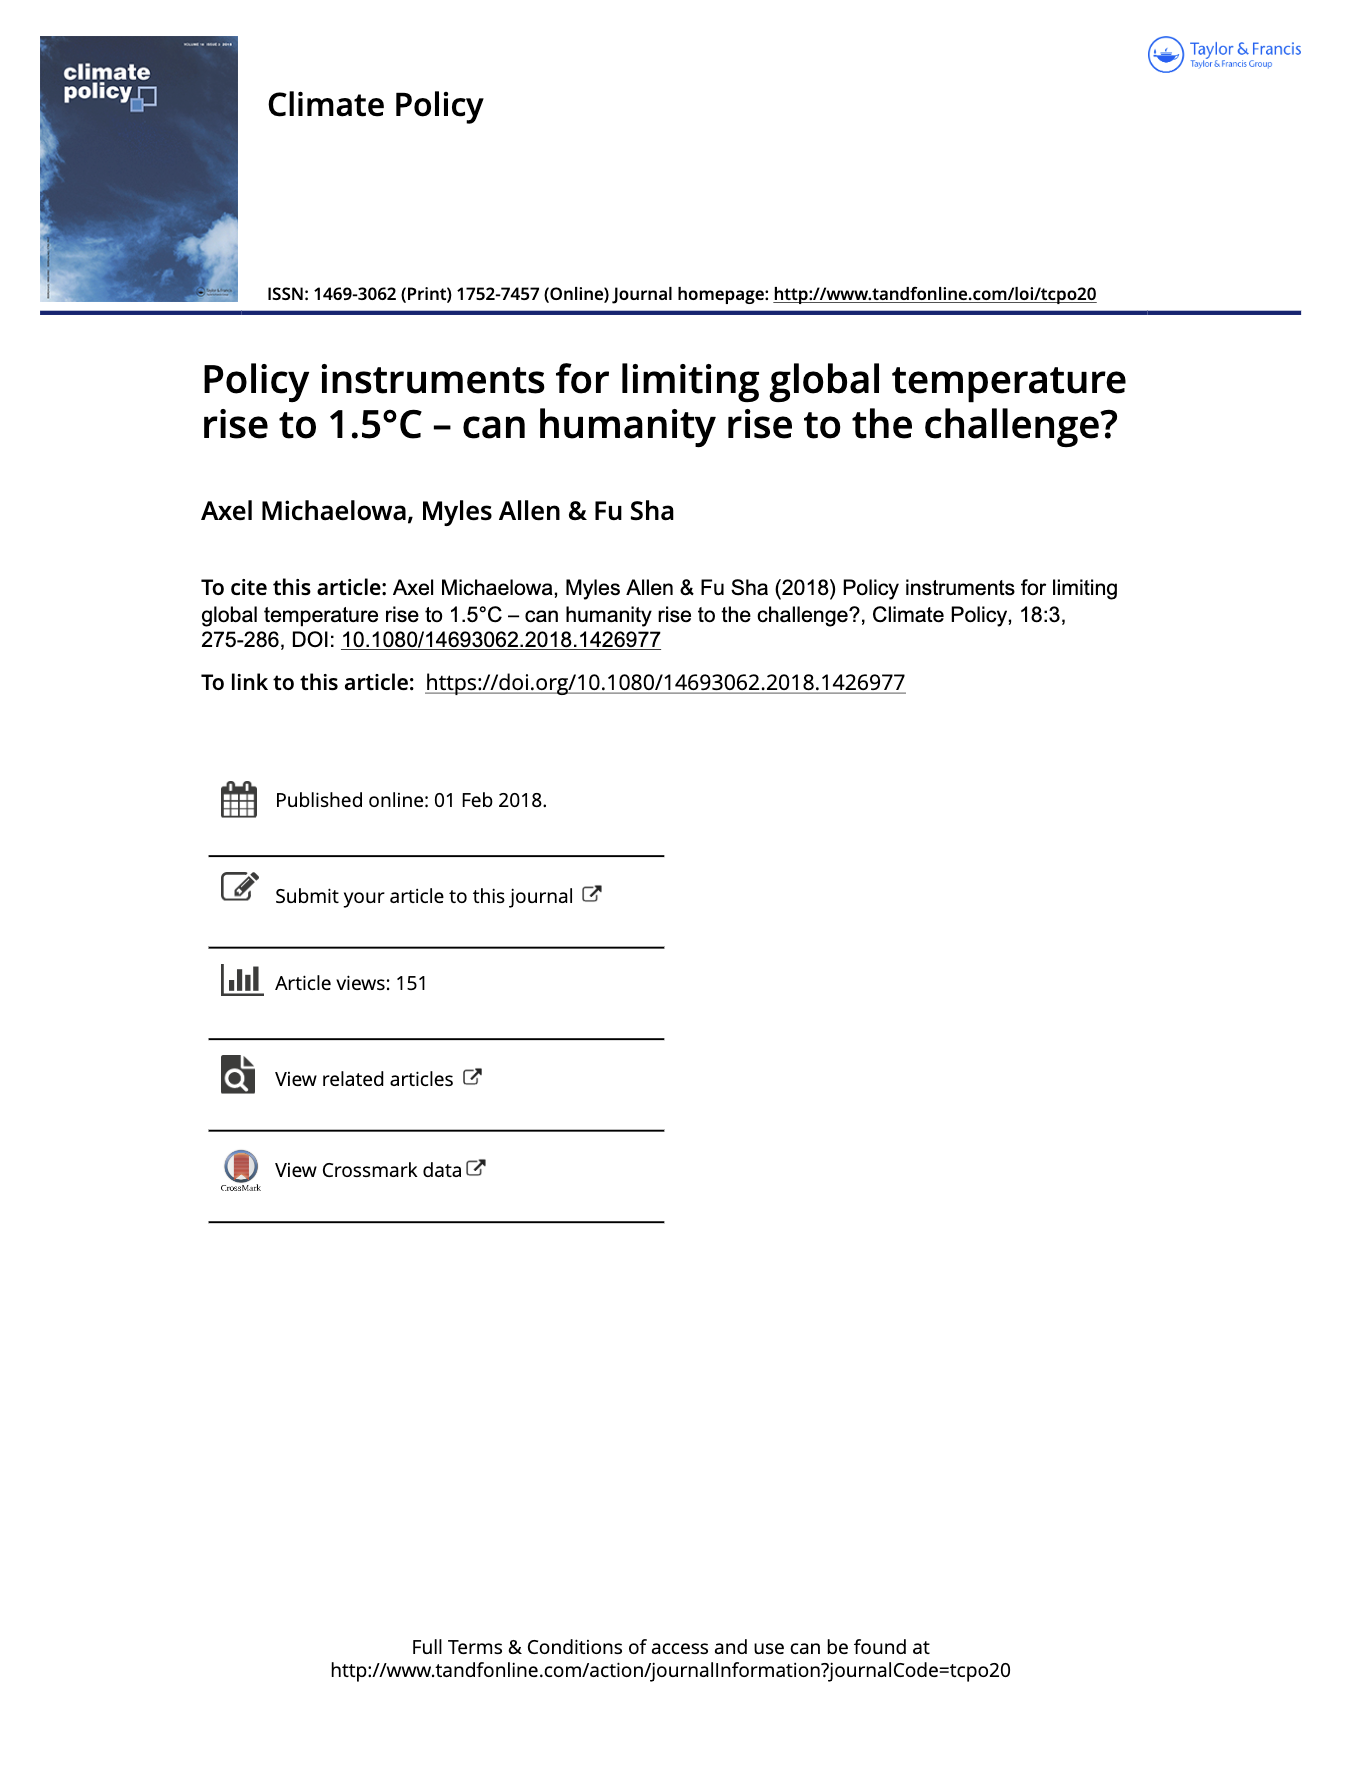 Policy instruments for limiting global temperature rise to 1.5°C – can humanity rise to the challenge?